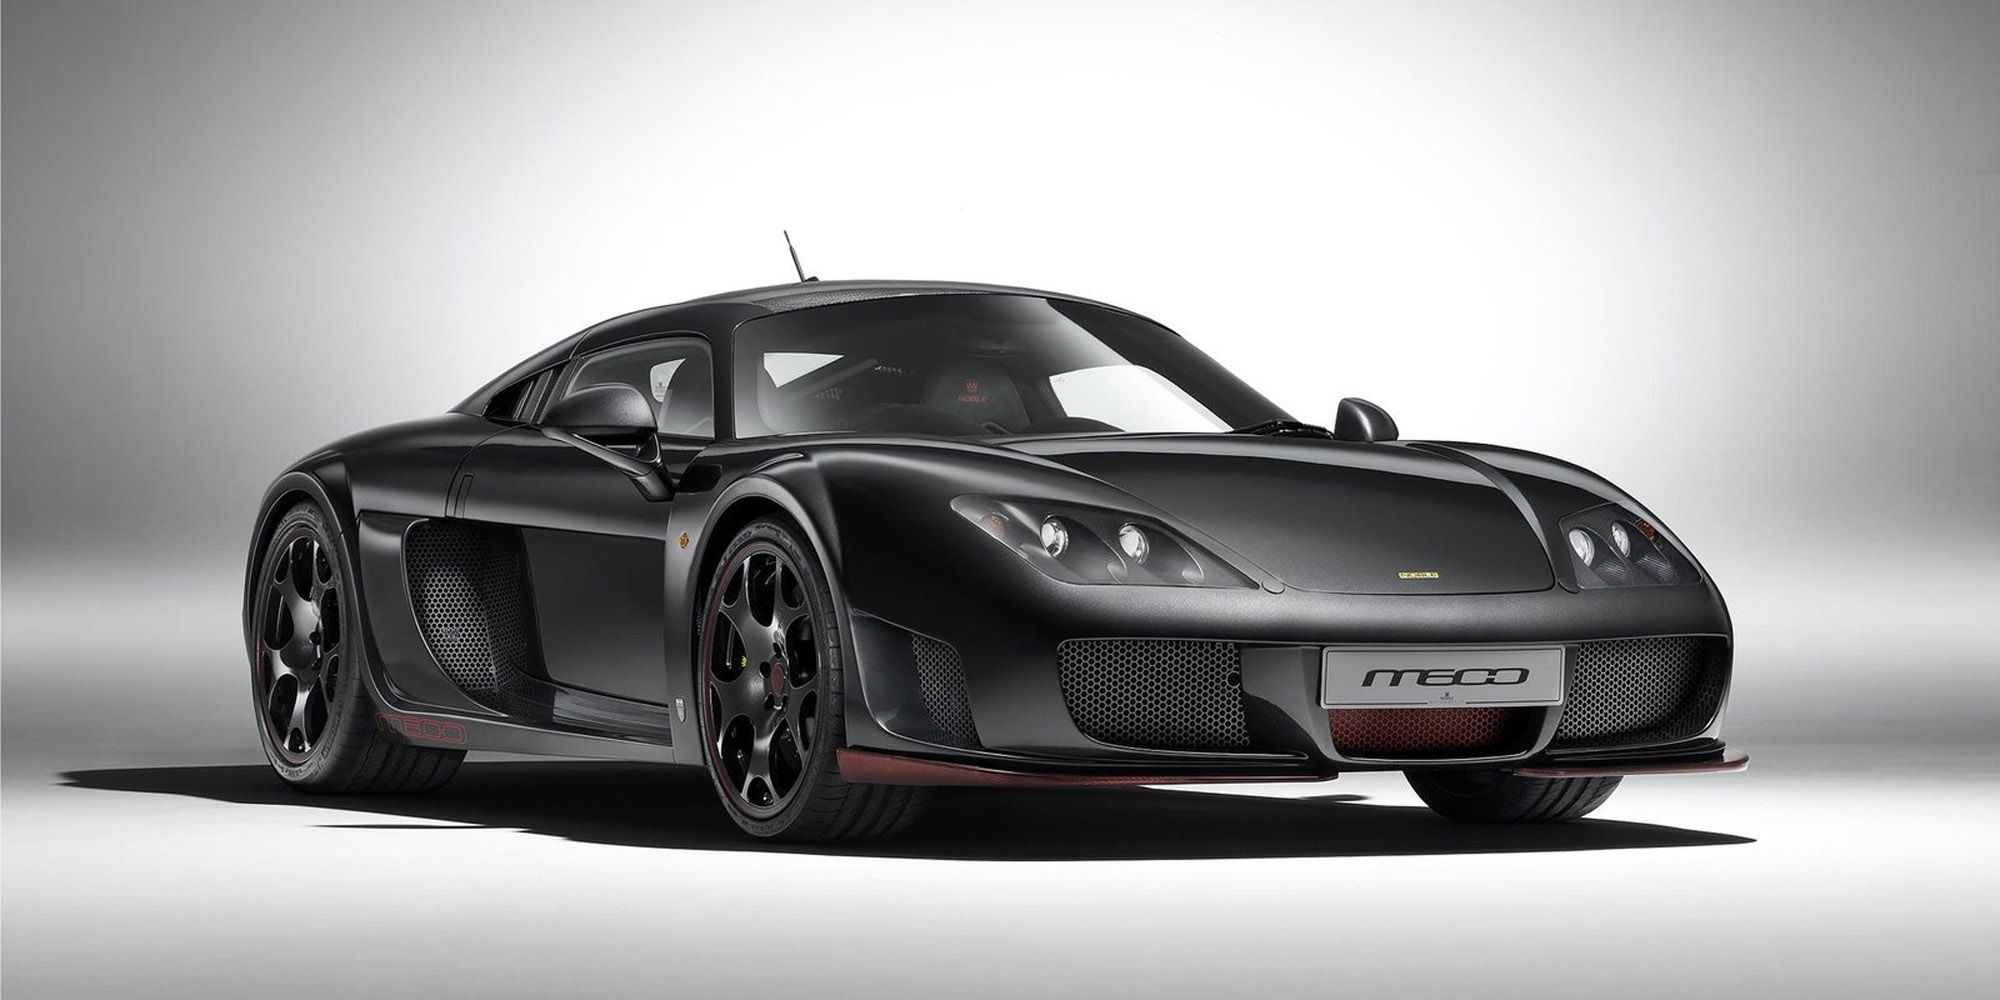 The front of a black Noble M600 with red accents